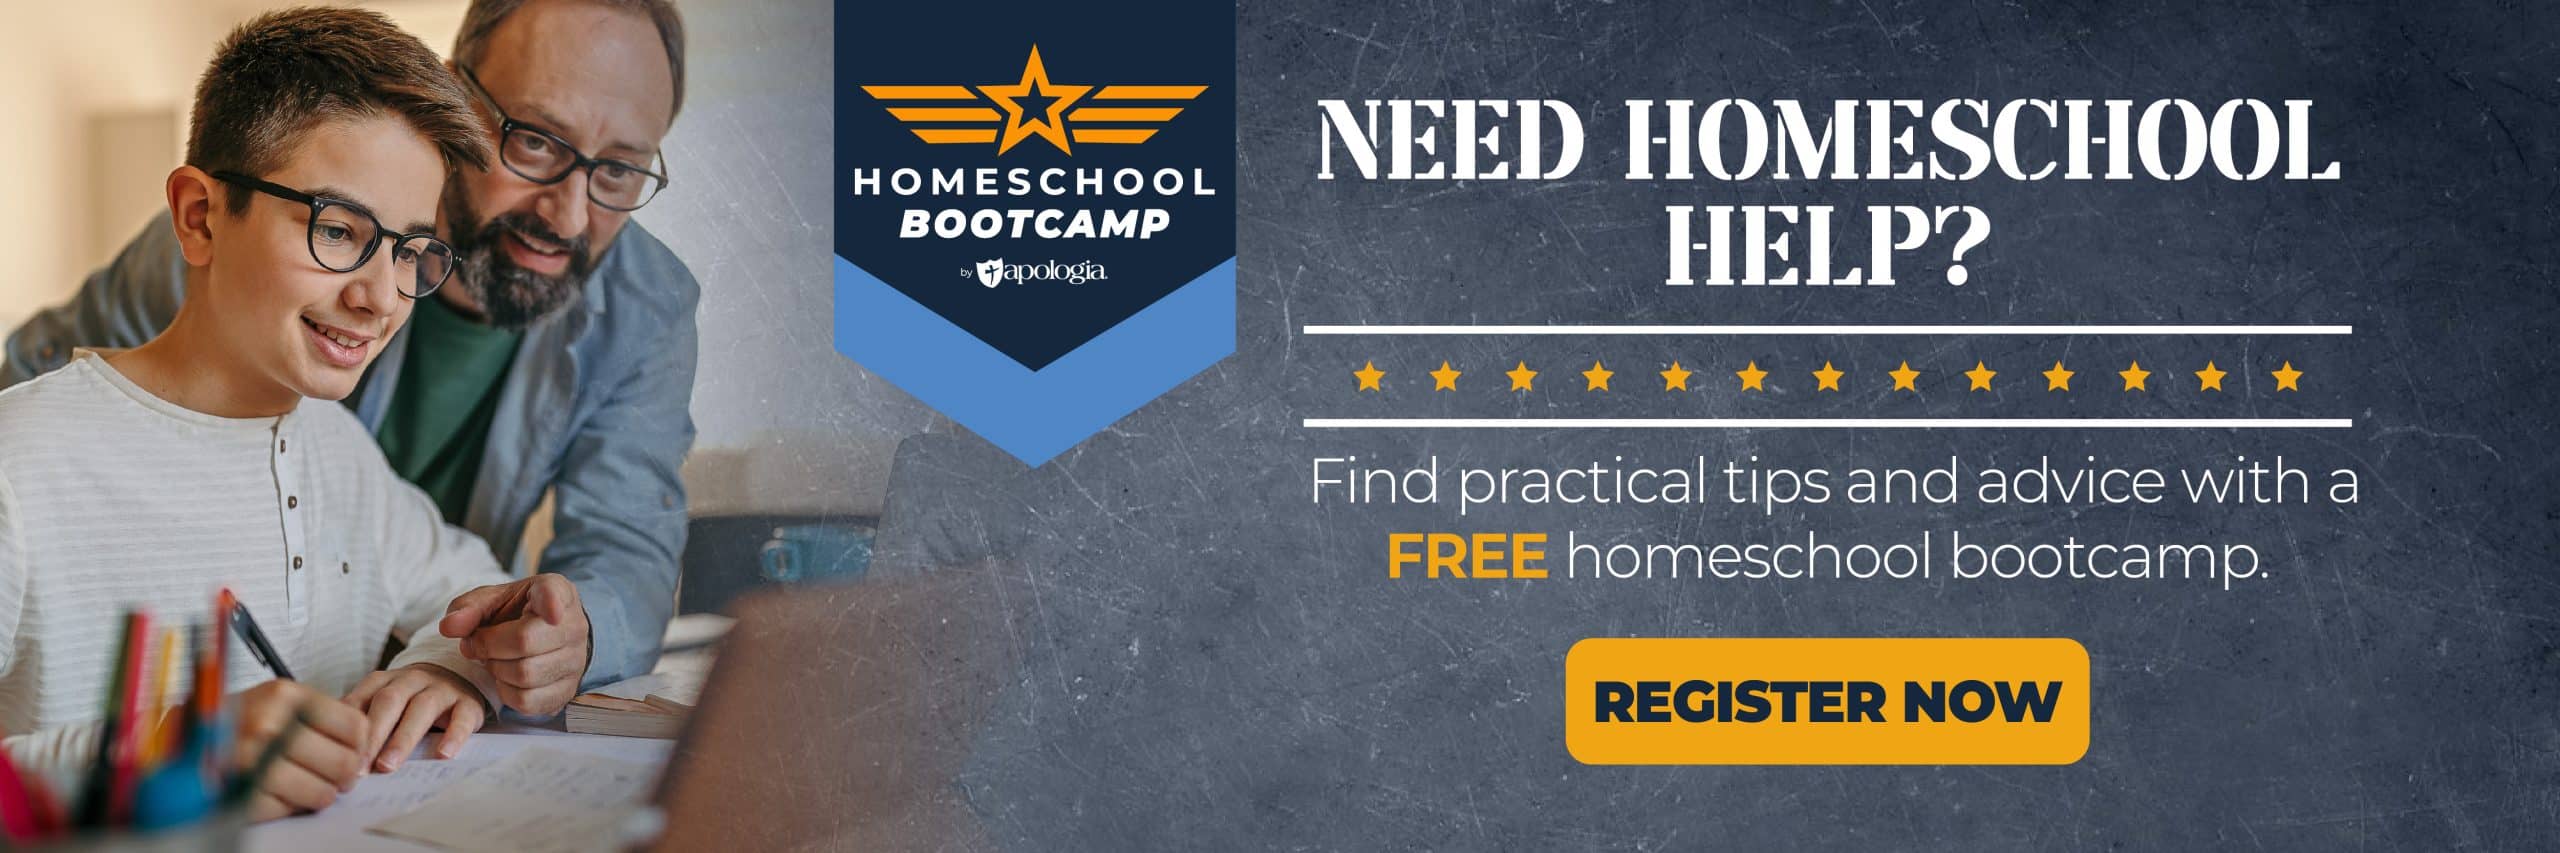 Register now for Apologia's FREE Homeschool Bootcamp!